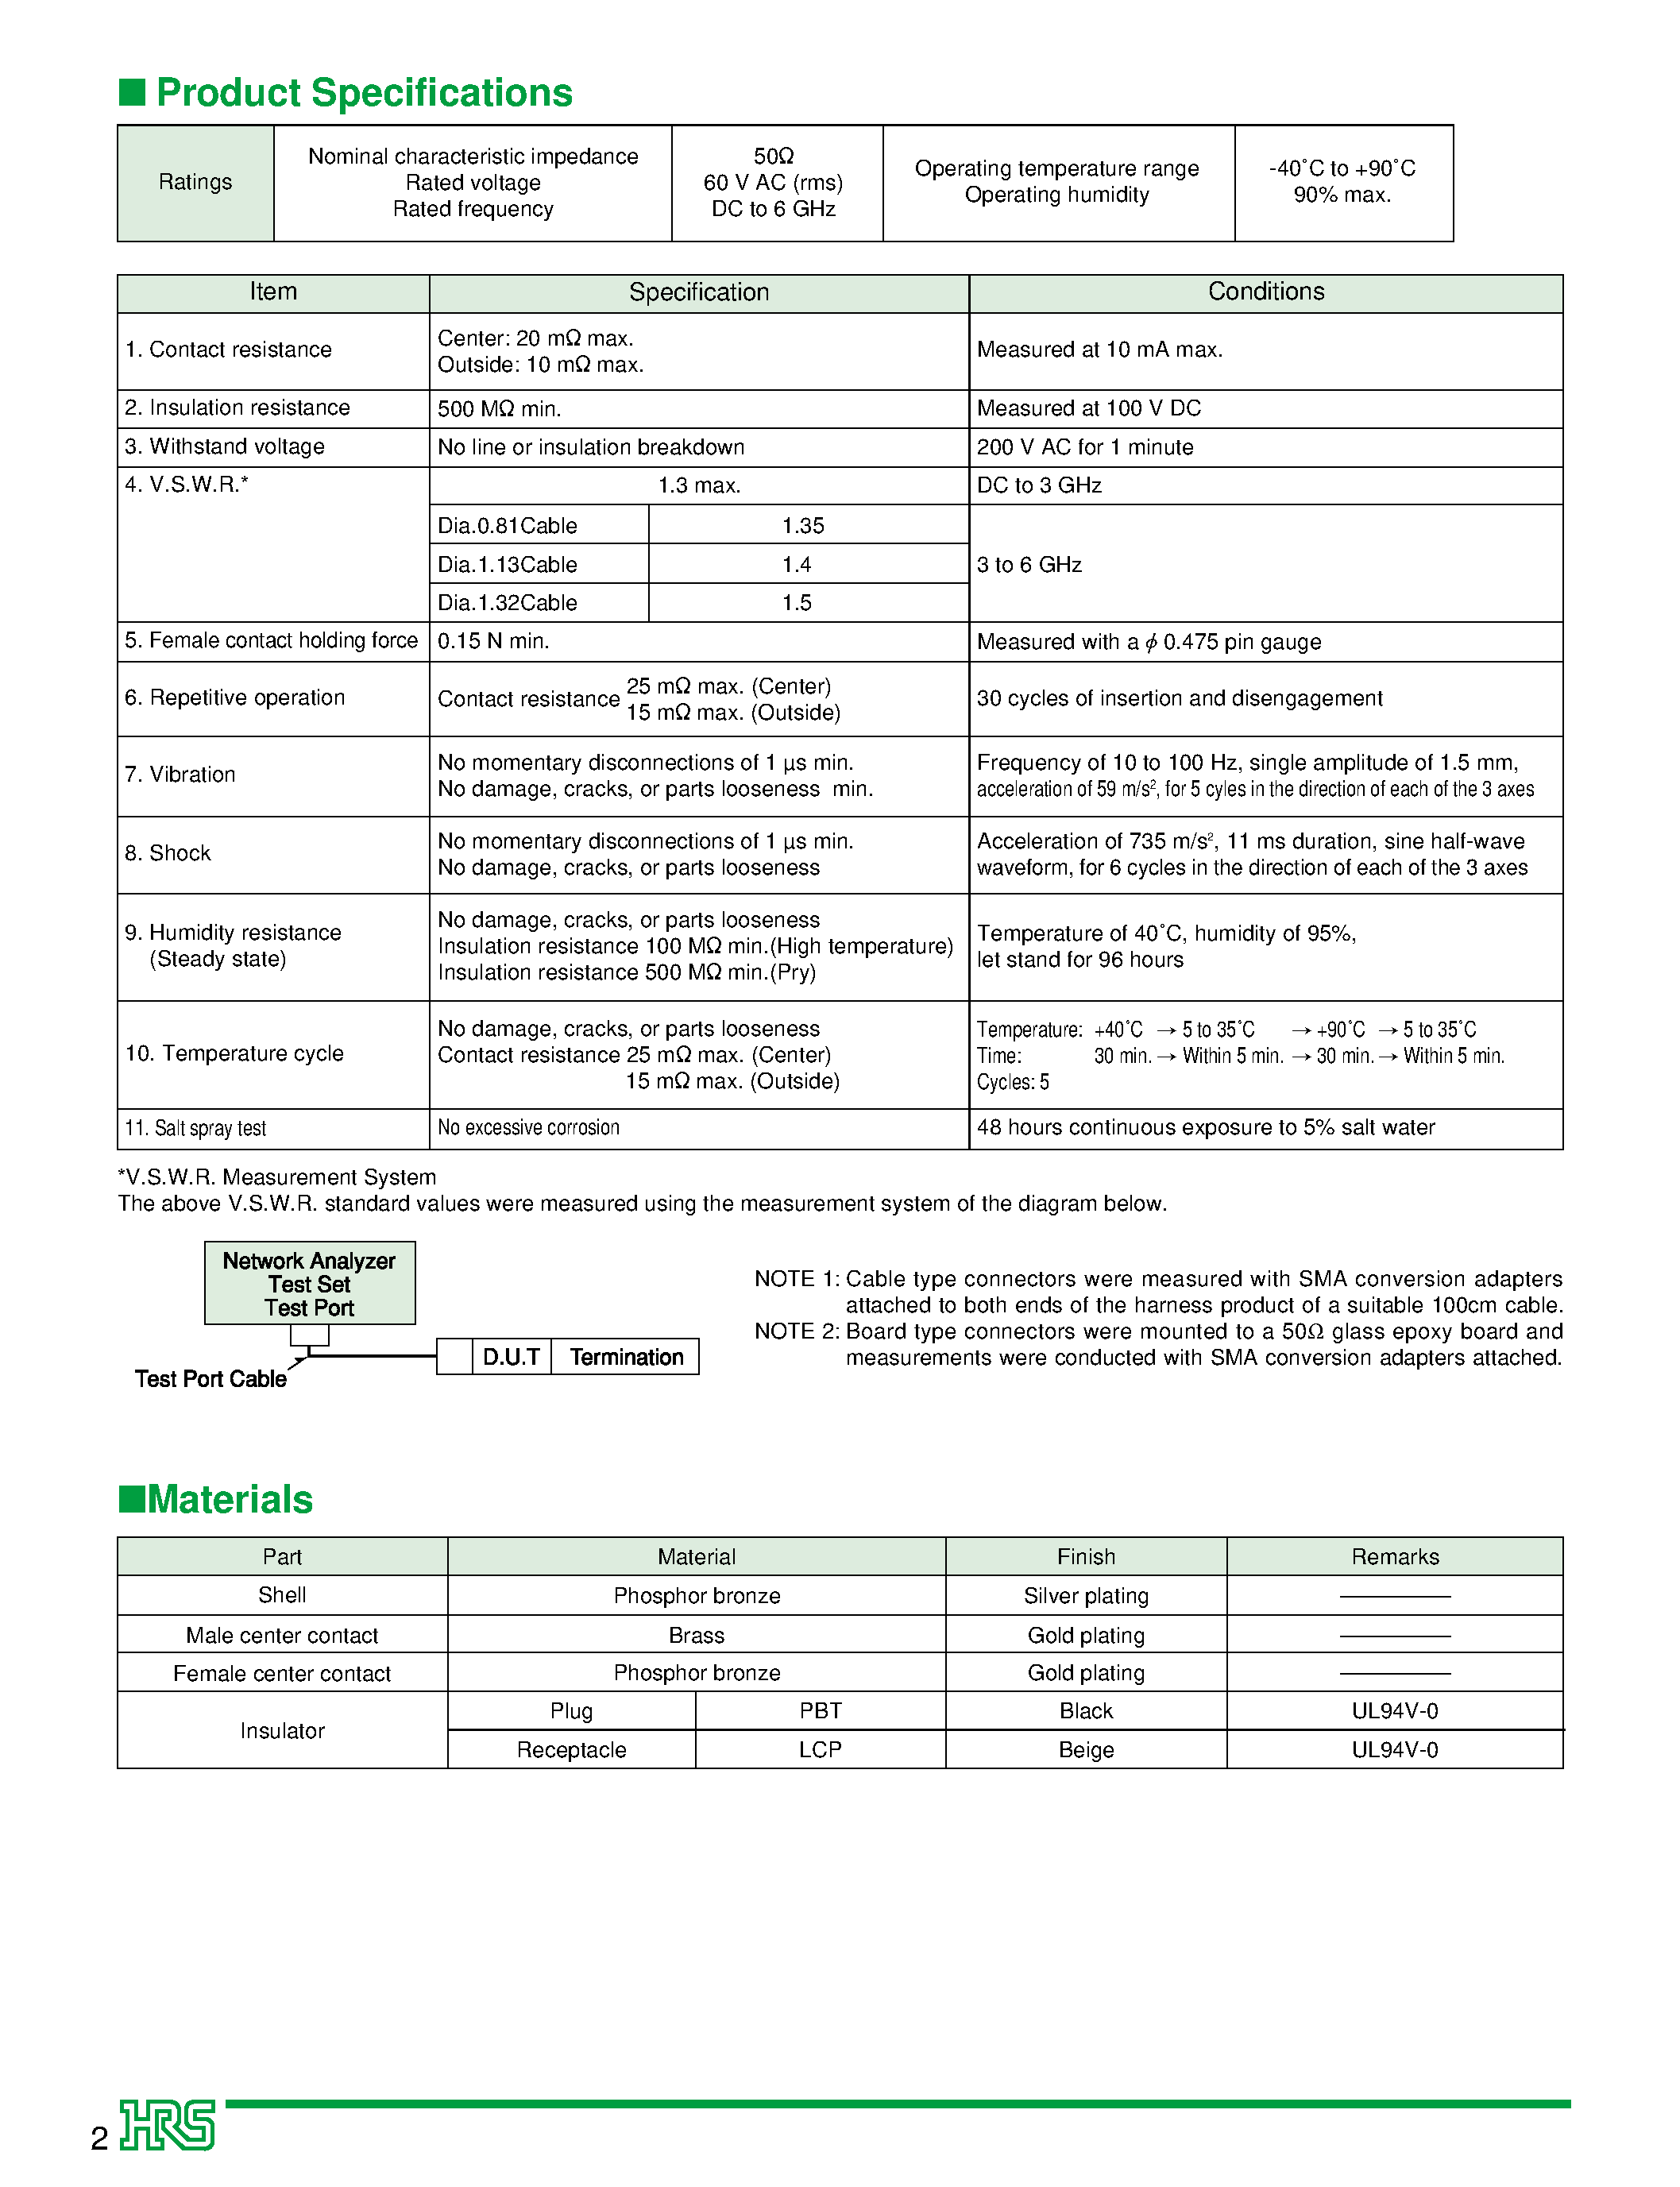 Datasheet CL331-0471-0-10 - (CL331-0471-0-01) Receptacles page 2